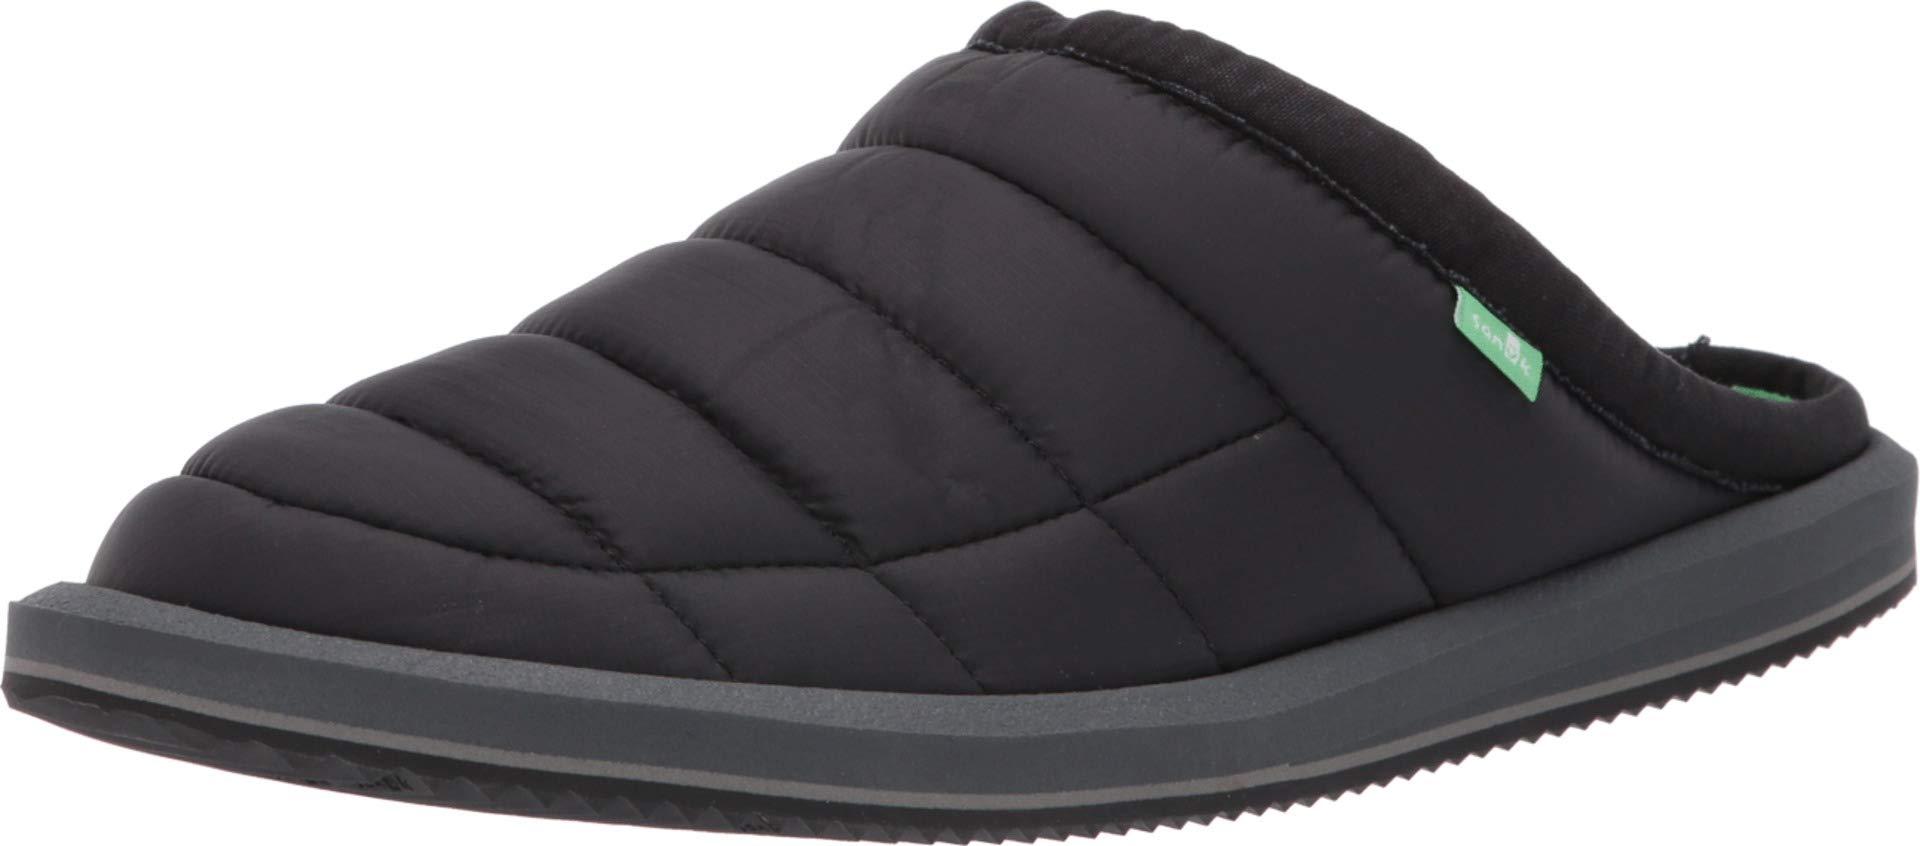 Sanuk Synthetic Puff N' Chill Low in Black for Men - Lyst